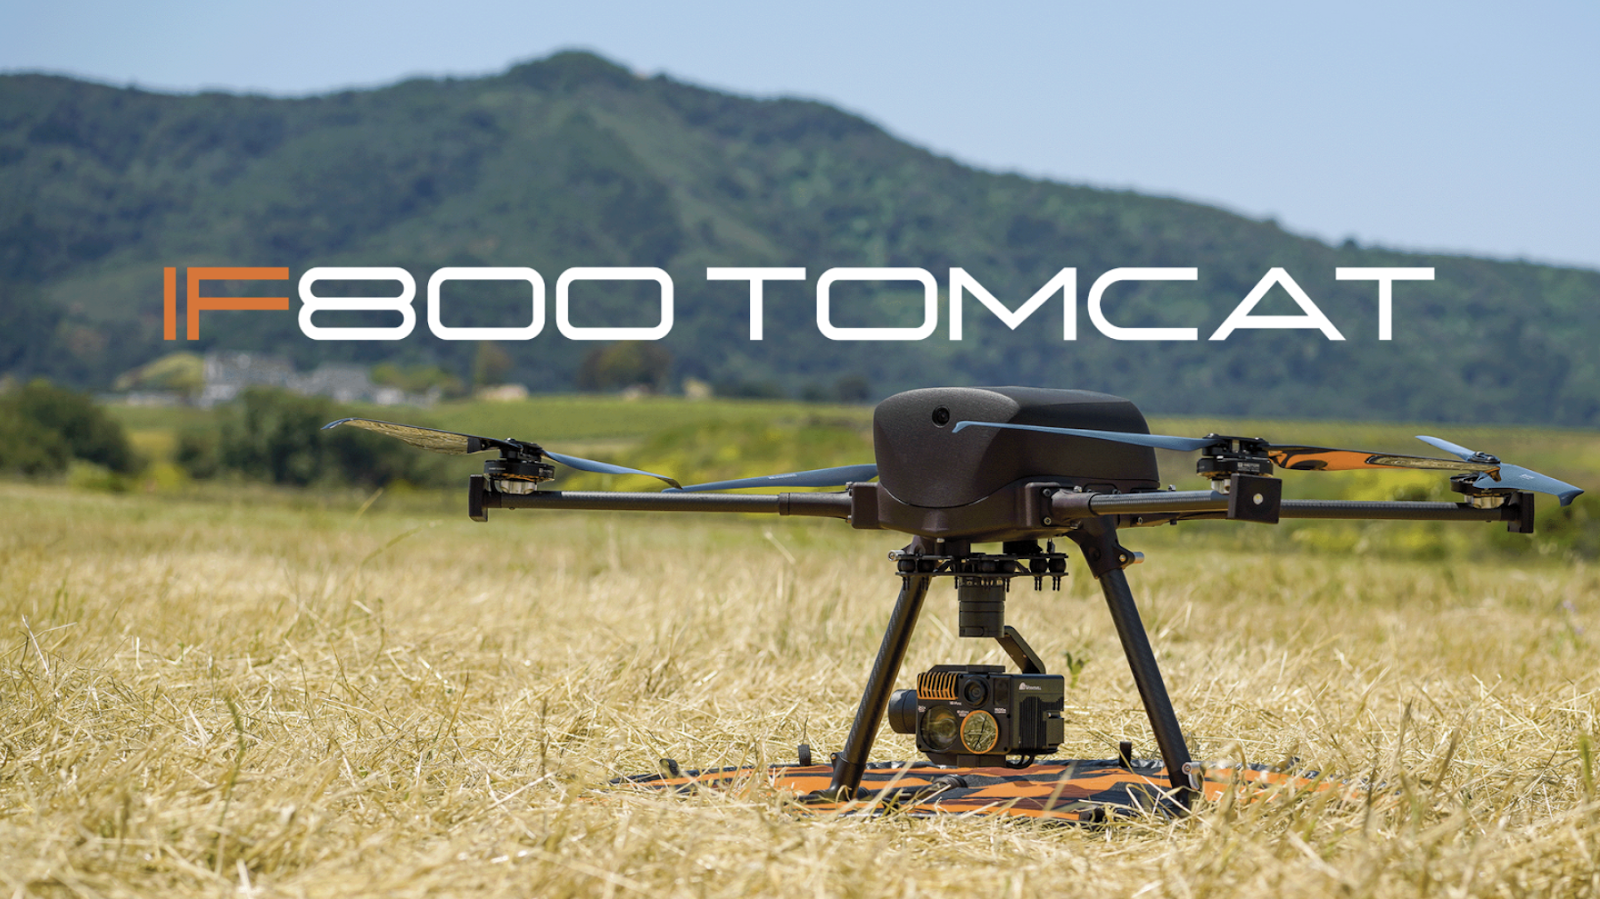 inspired flight energy & utility drone the IF800 tomcat